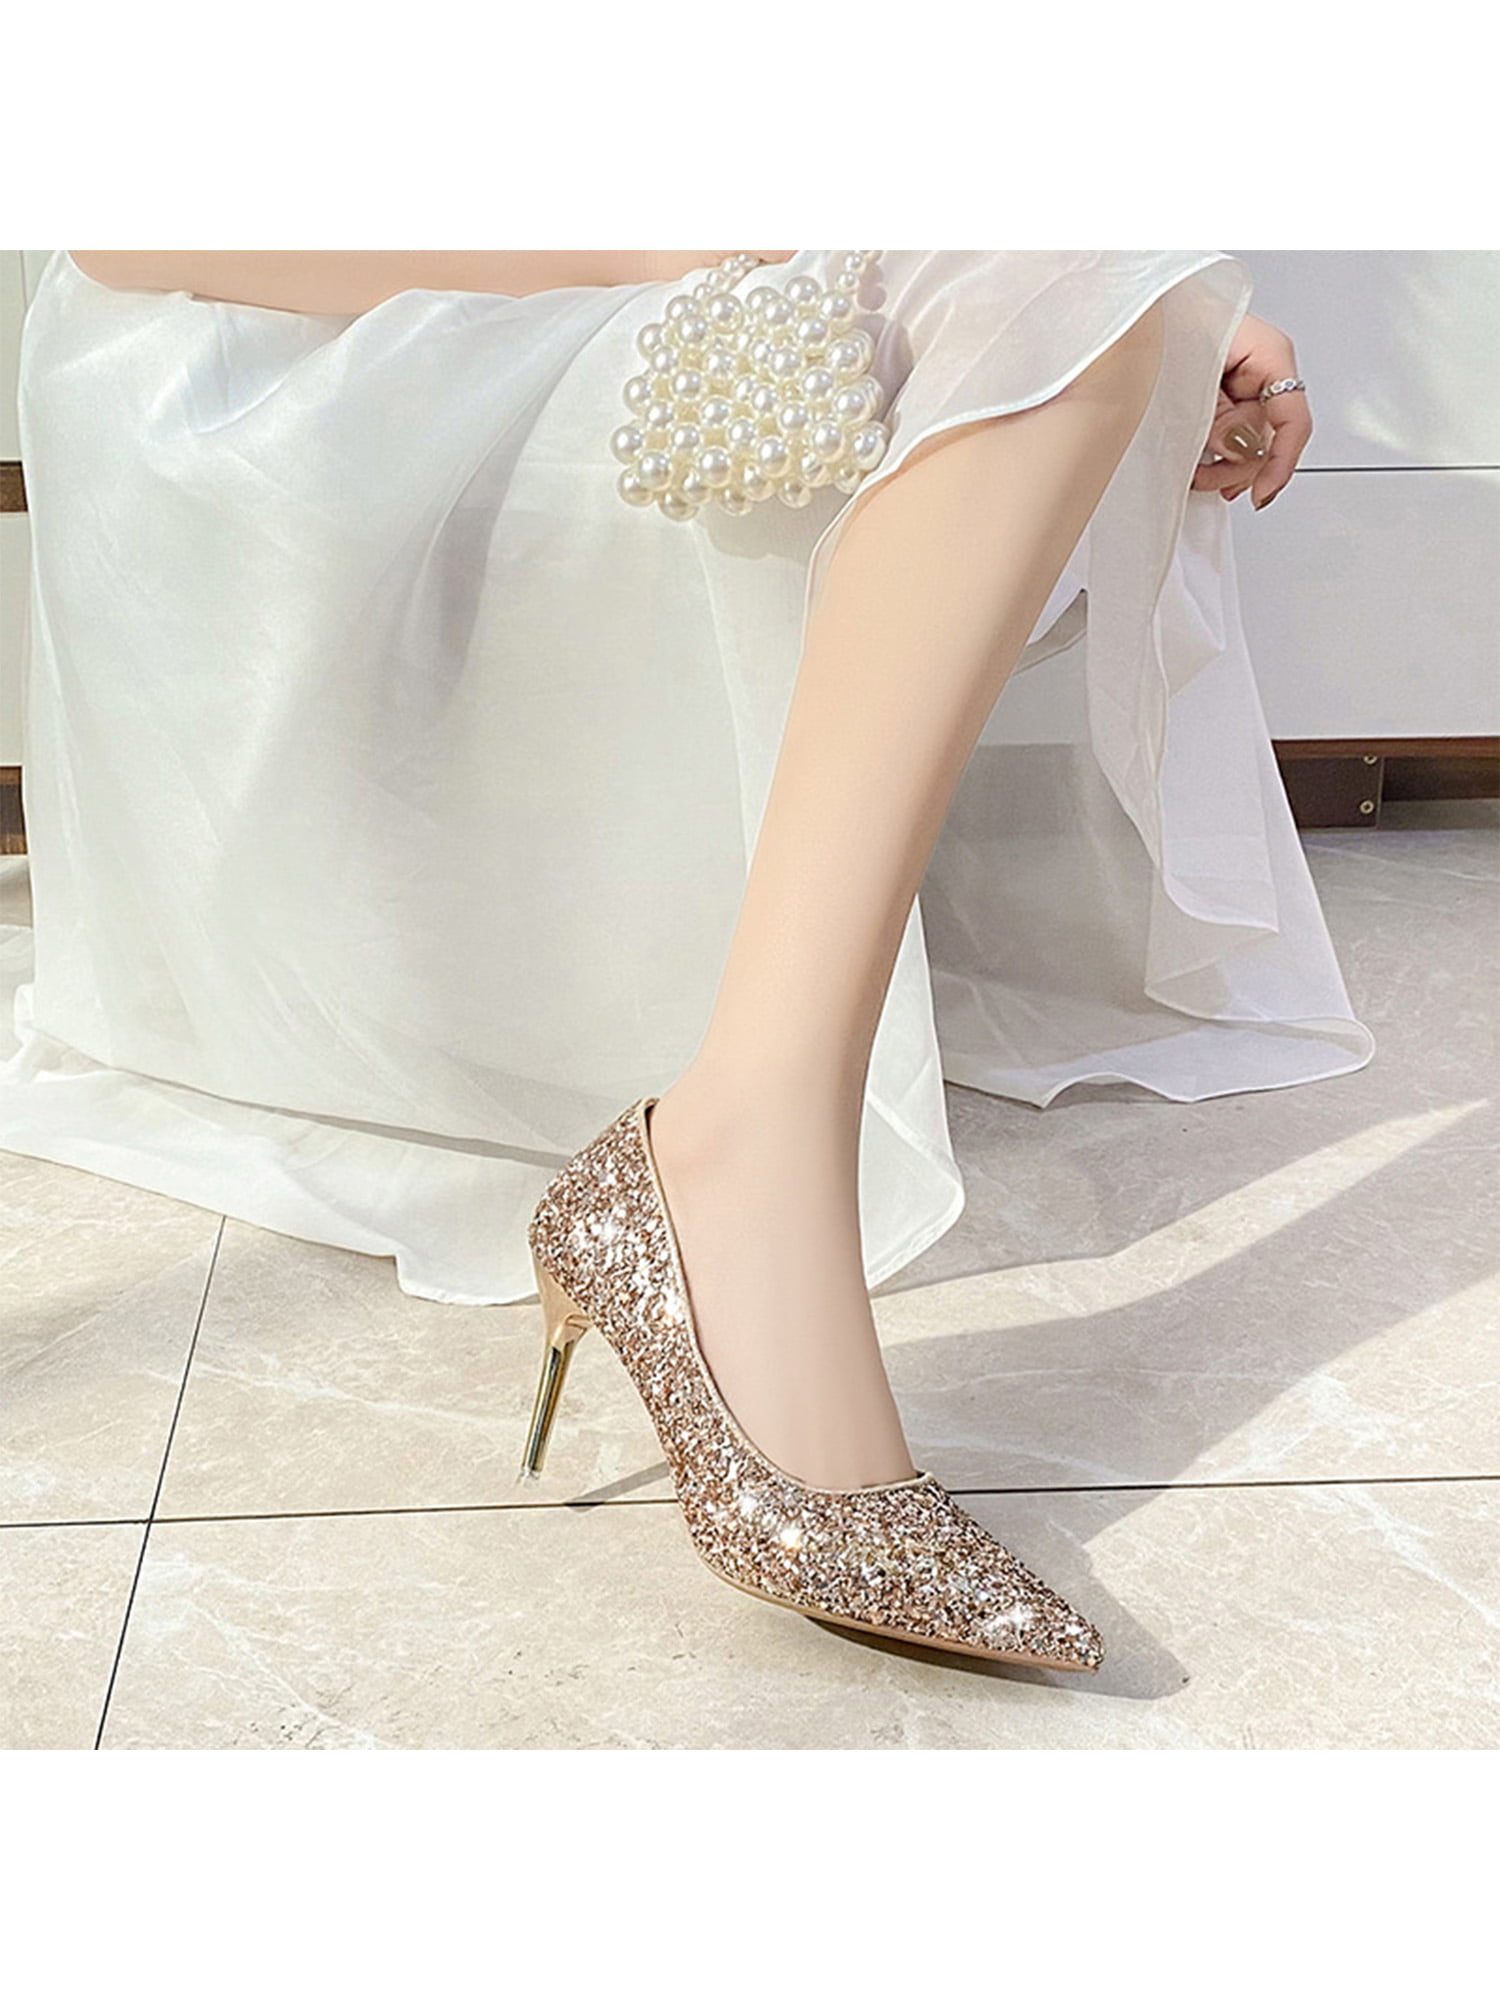 11 Ideas For Comfortable Bridal Shoes Which Are Not High Heels!